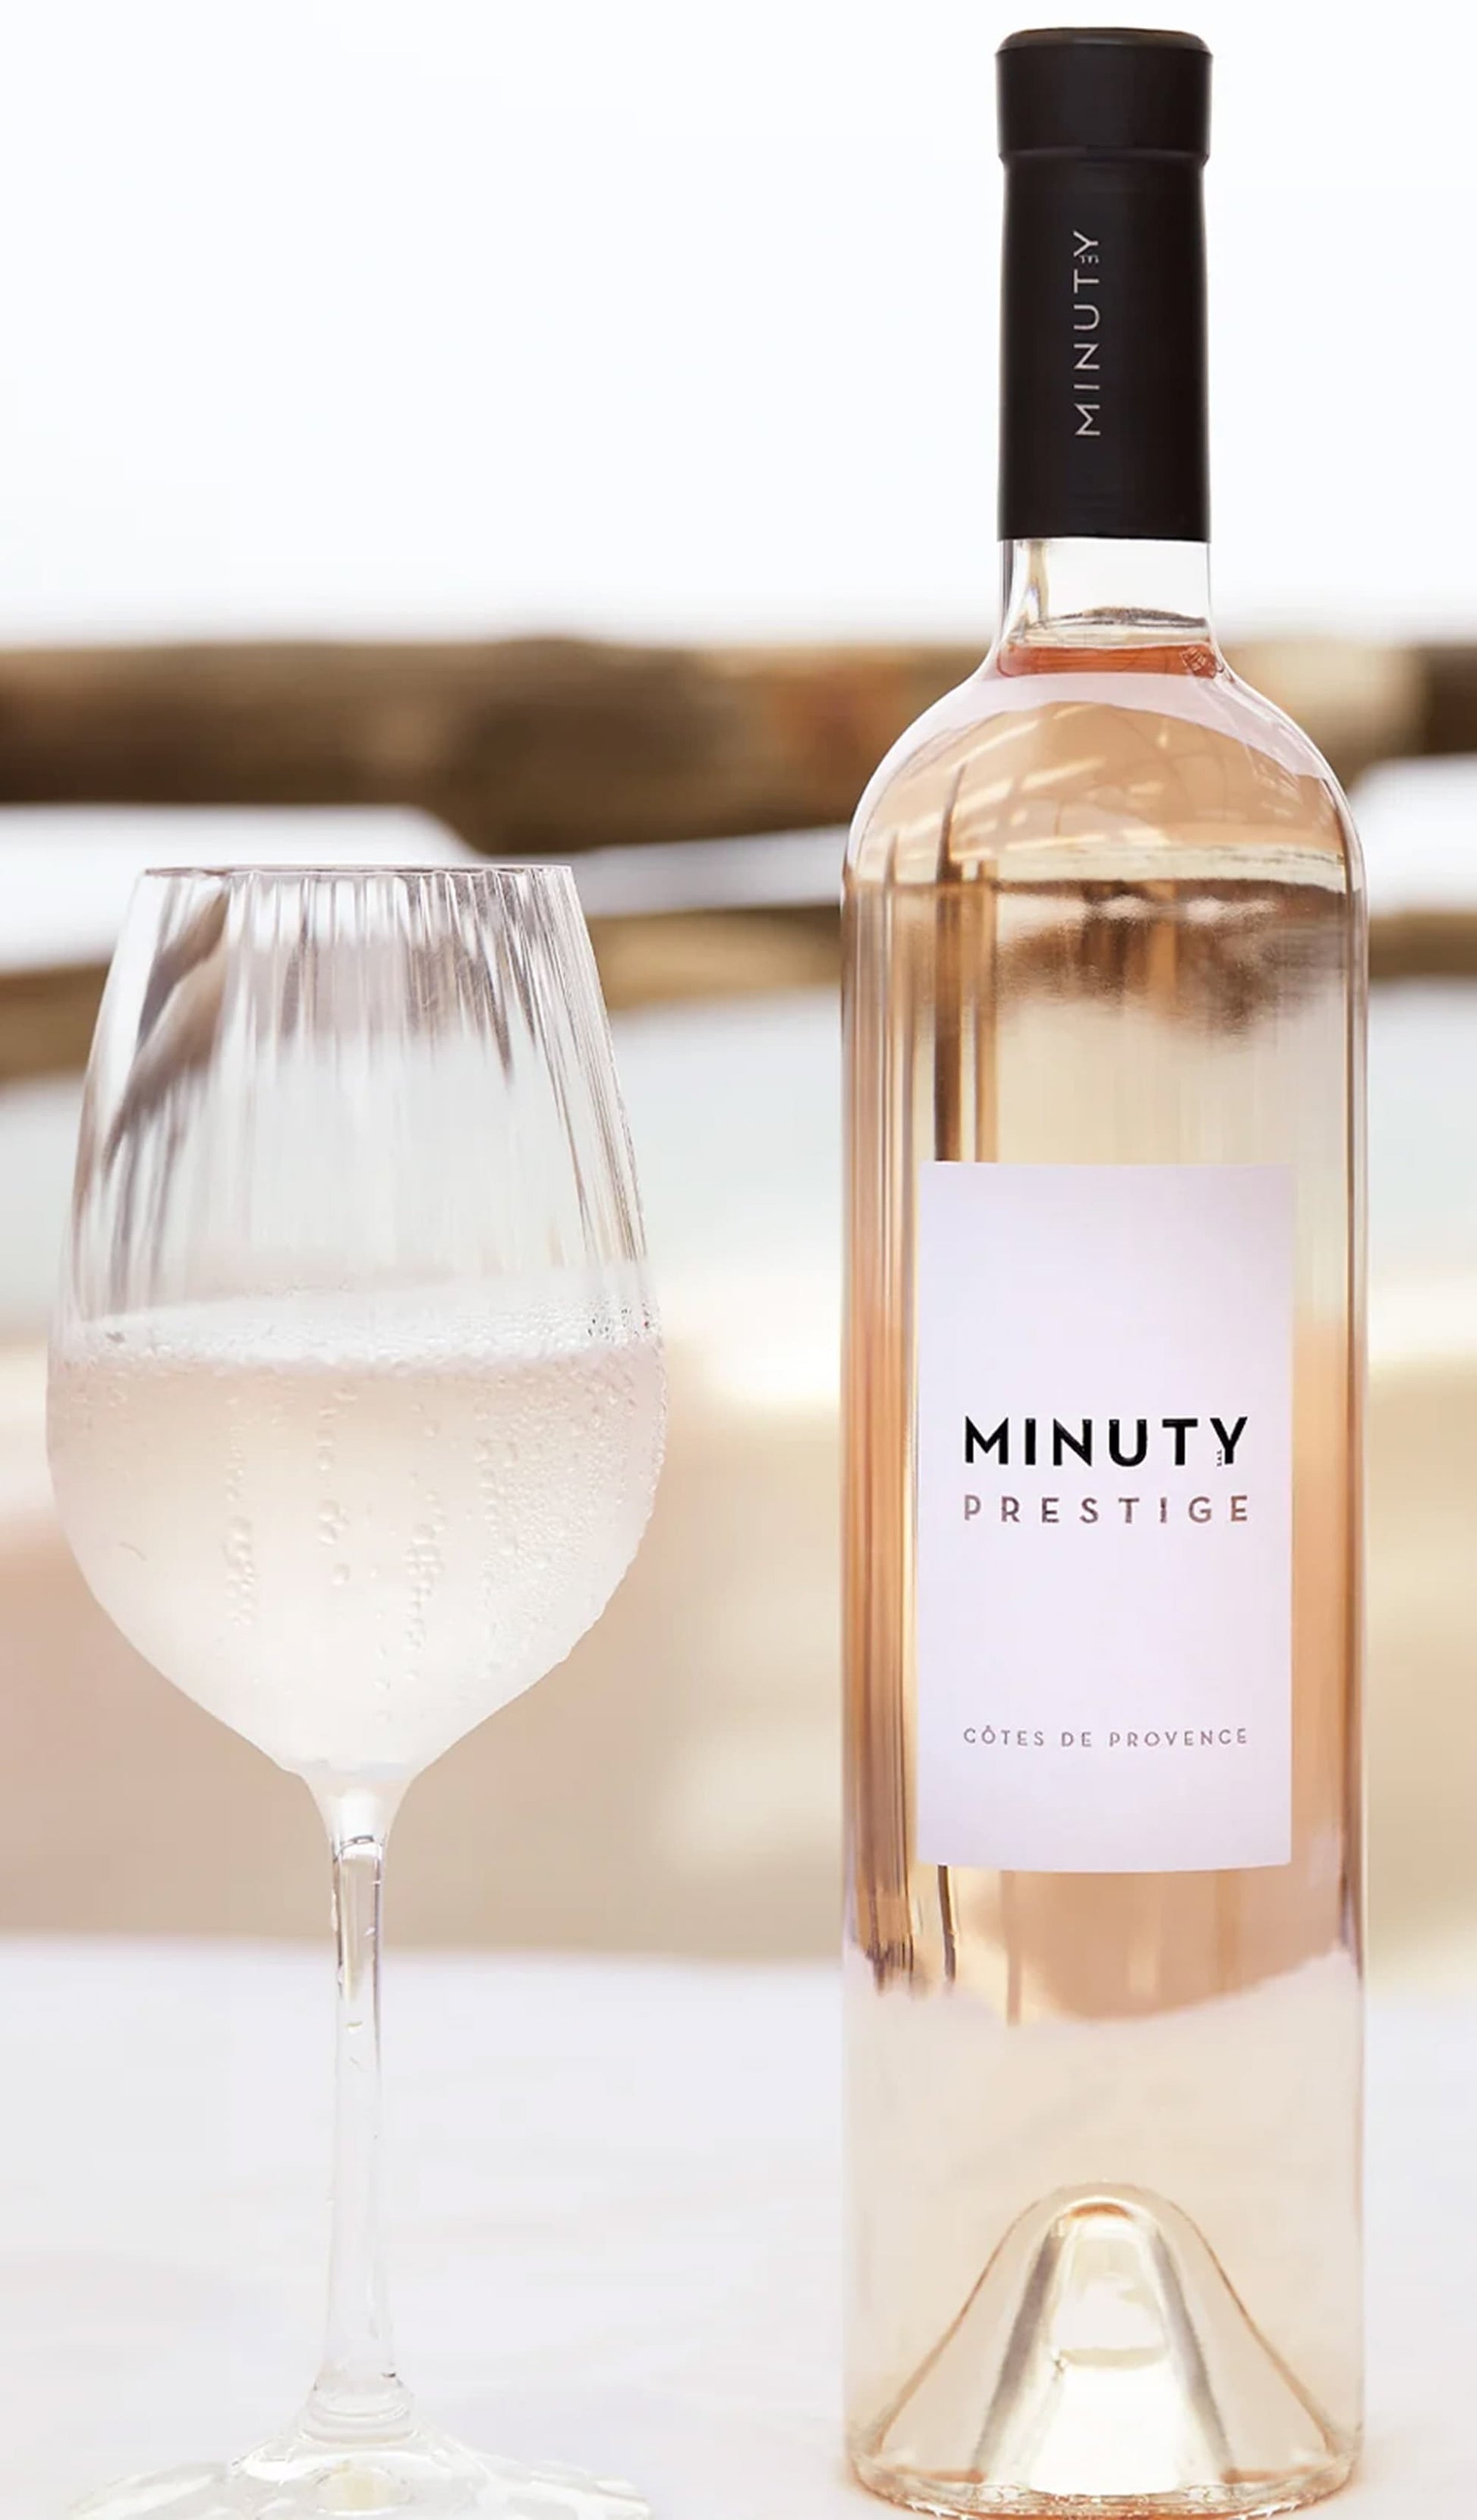 Find out more or purchase Minuty Cotes de Provence Prestige Rose 2023 (France) online at Wine Sellers Direct - Australia's independent liquor specialists.